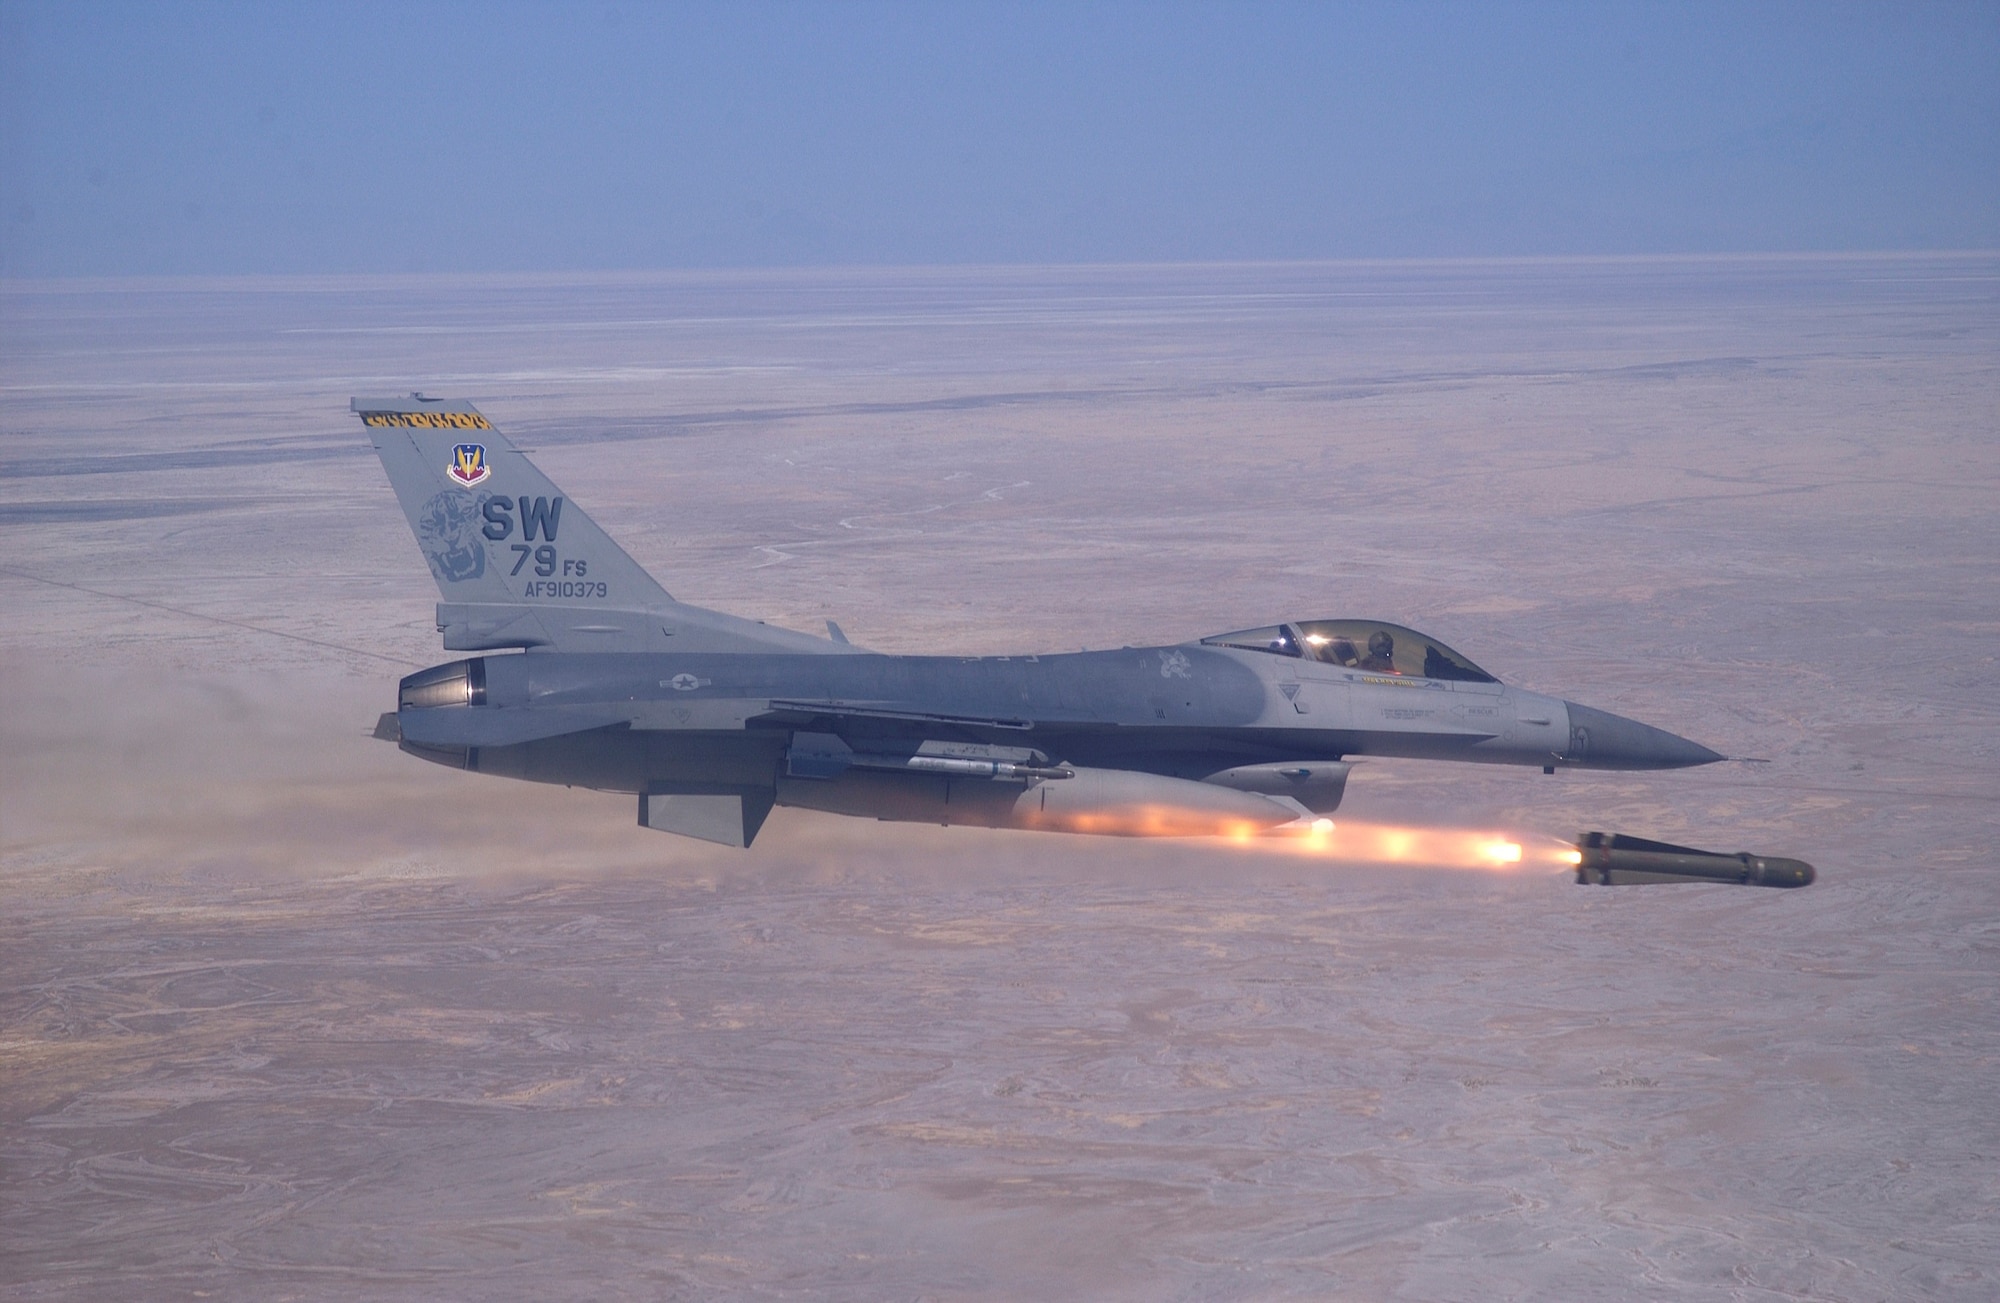 An F-16CM Fighting Falcon assigned to the 55th Fighter Squadron fires a missile during operation Southern Watch in 2002. F-16s provided support in the annihilation of enemy surface to air units throughout many operations including Northern Watch and currently Operation Inherent Resolve. (Courtesy photo)